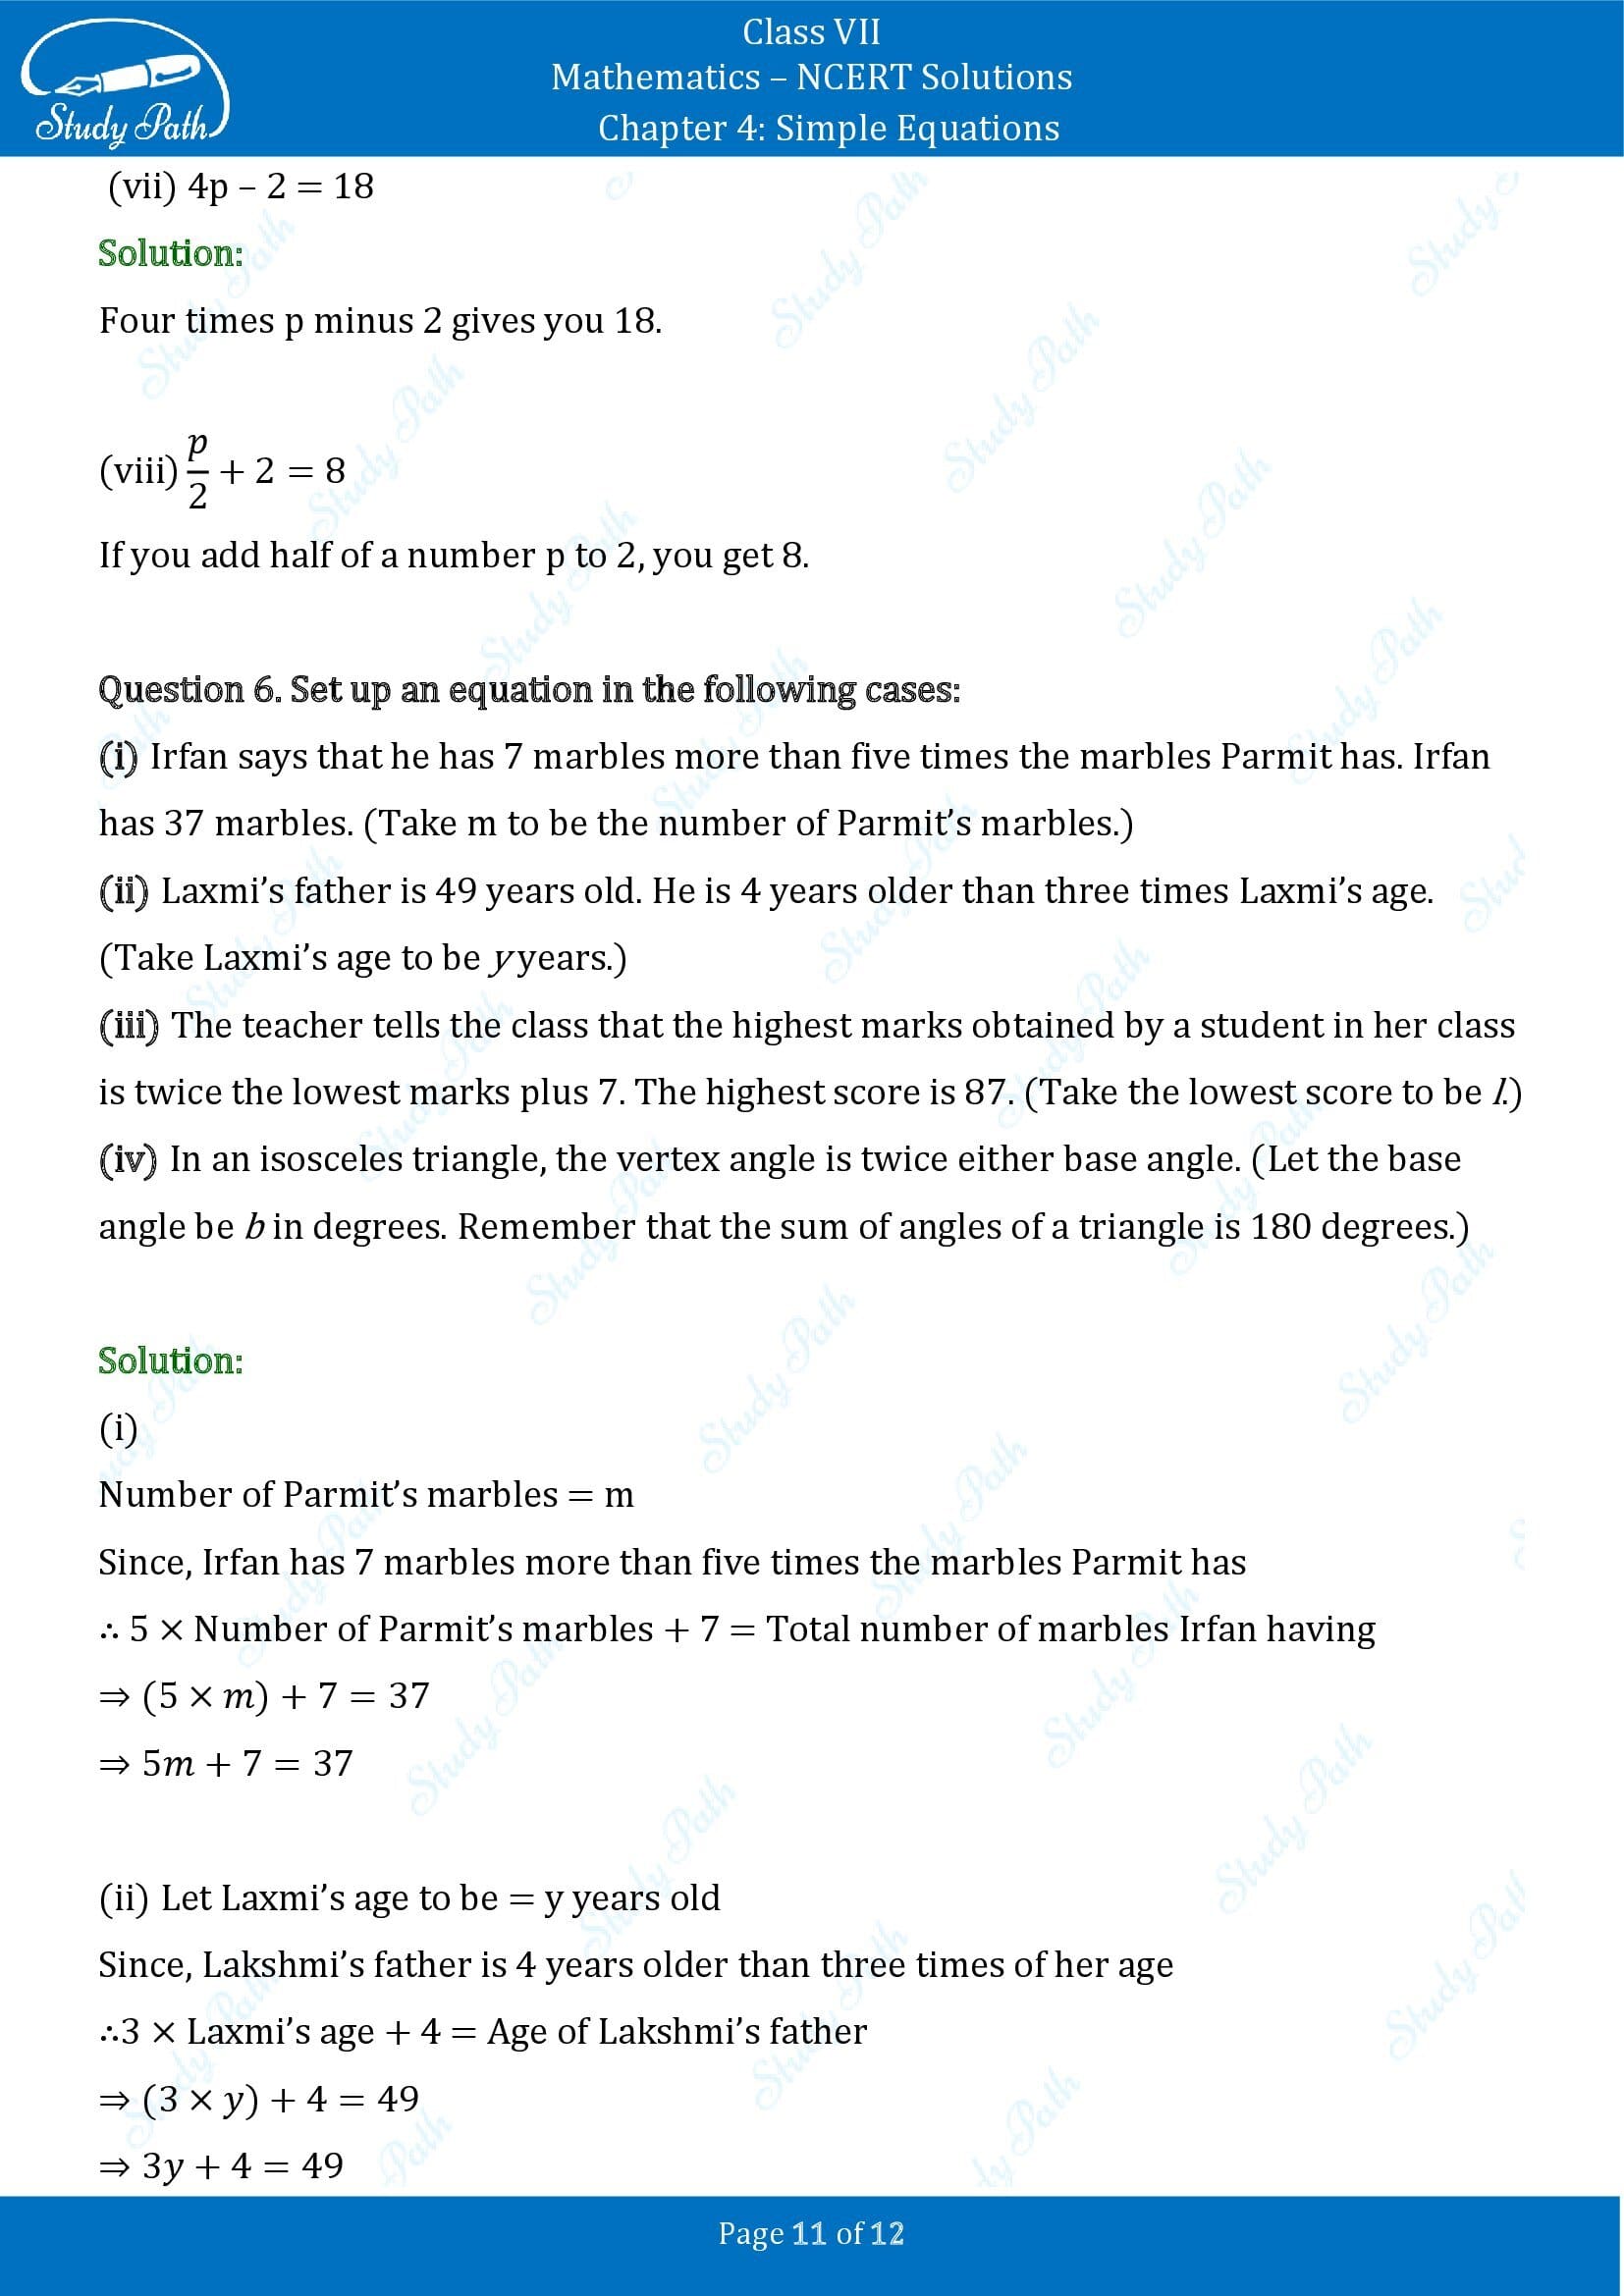 NCERT Solutions for Class 7 Maths Chapter 4 Simple Equations Exercise 4.1 00011